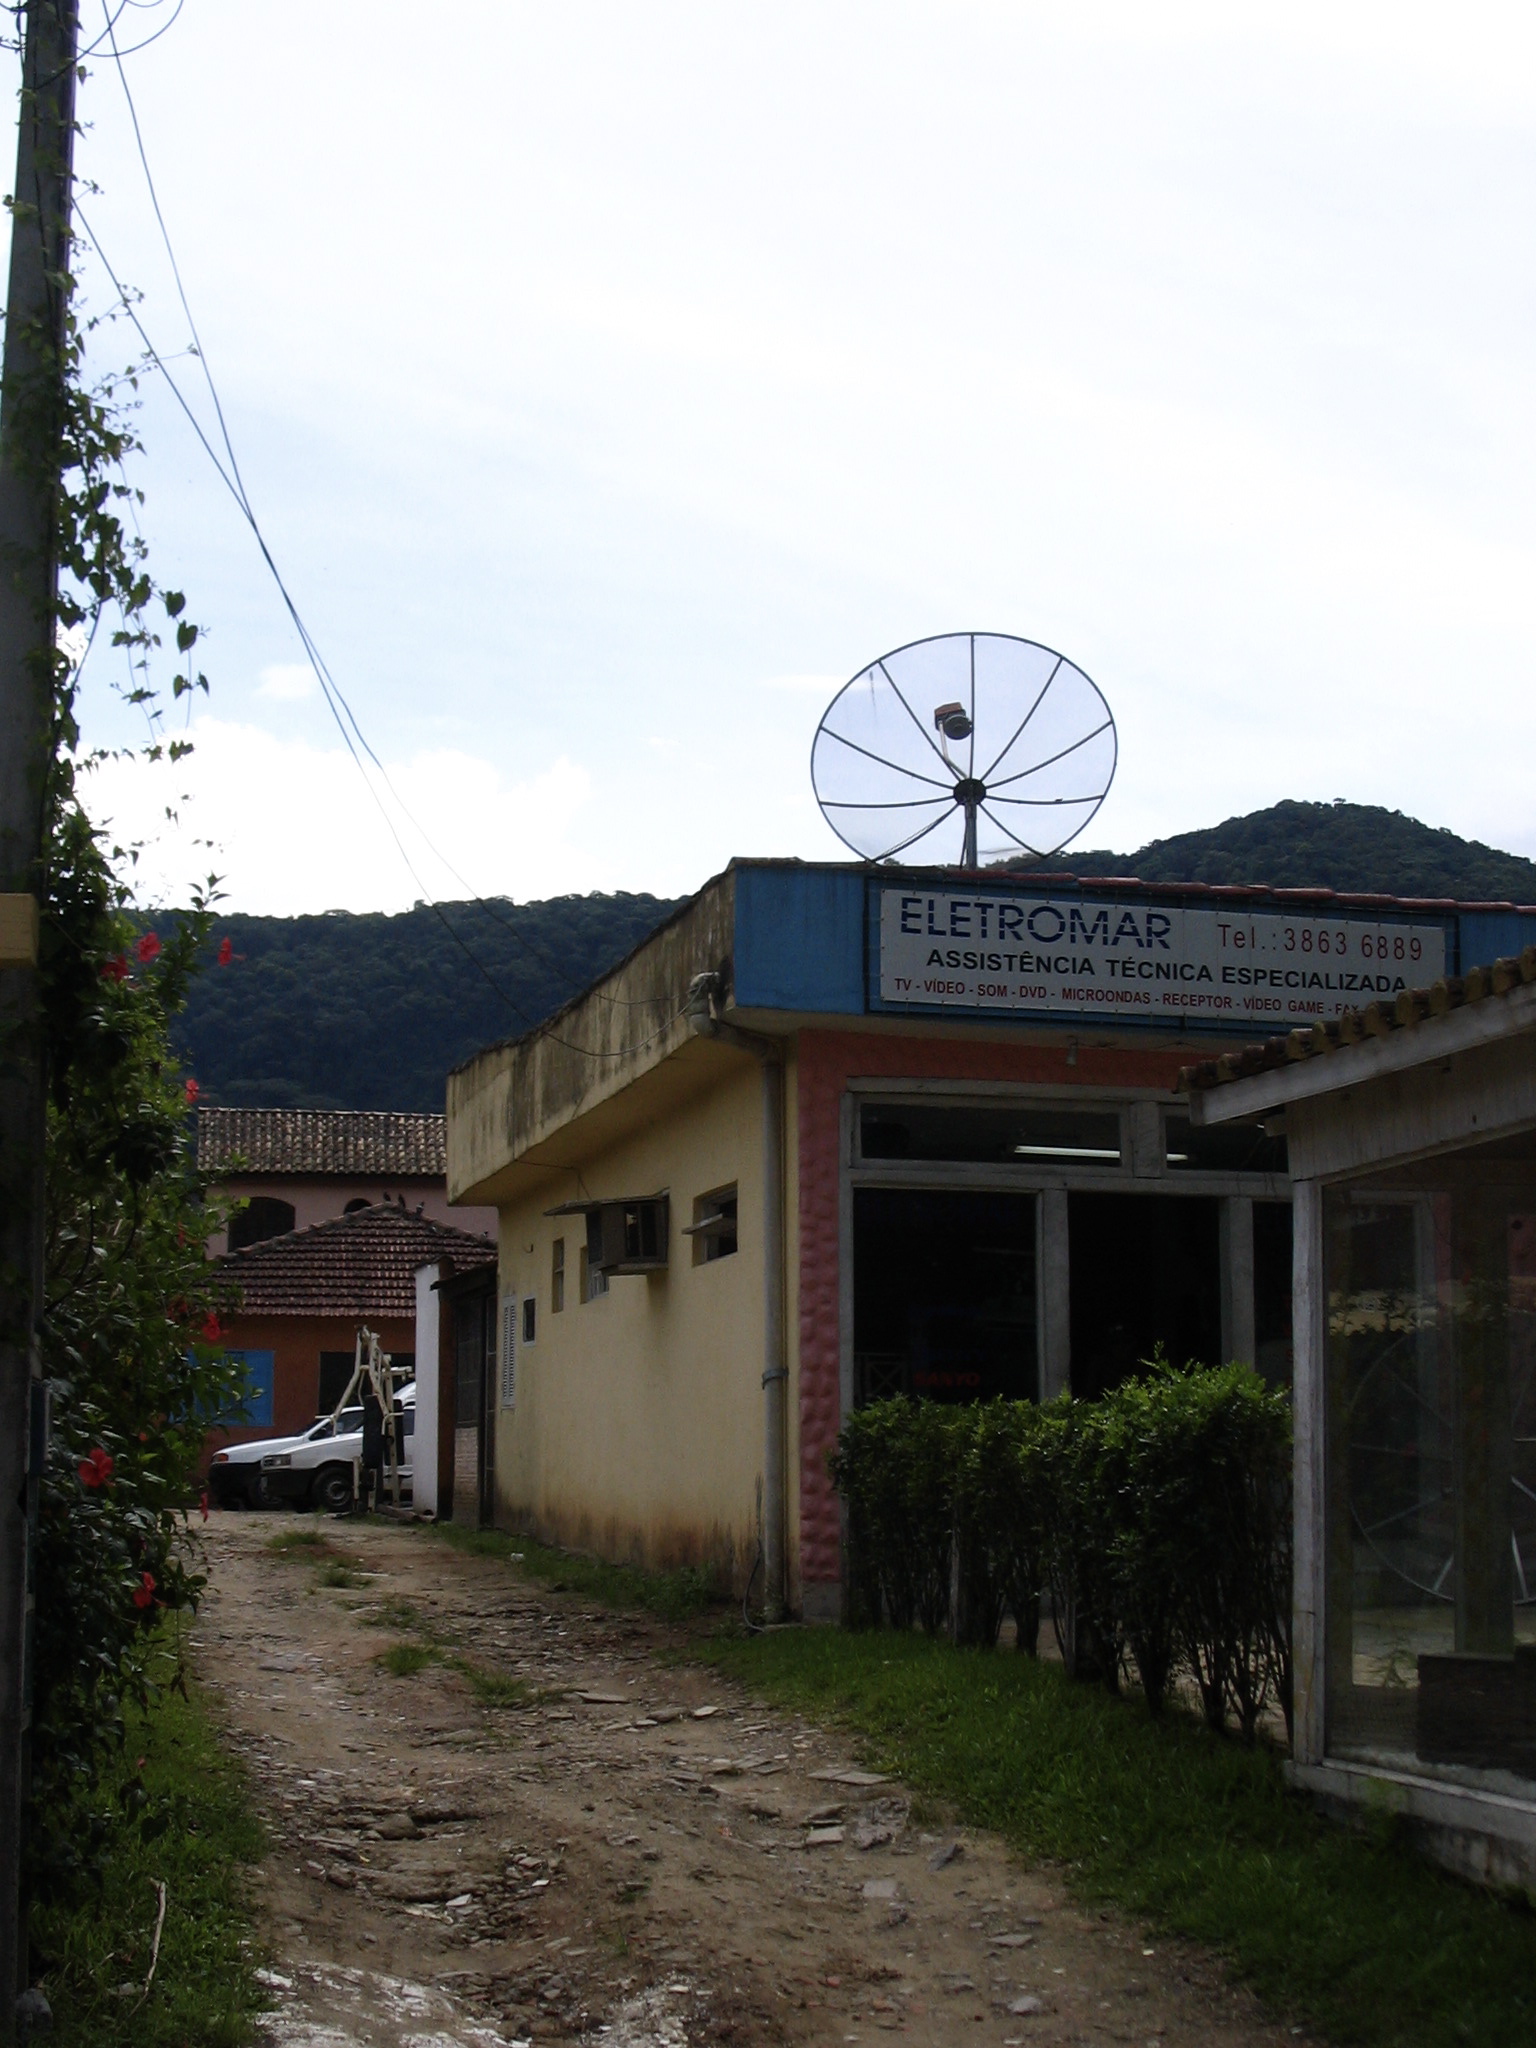 old fashioned building with satellite dish in a small street